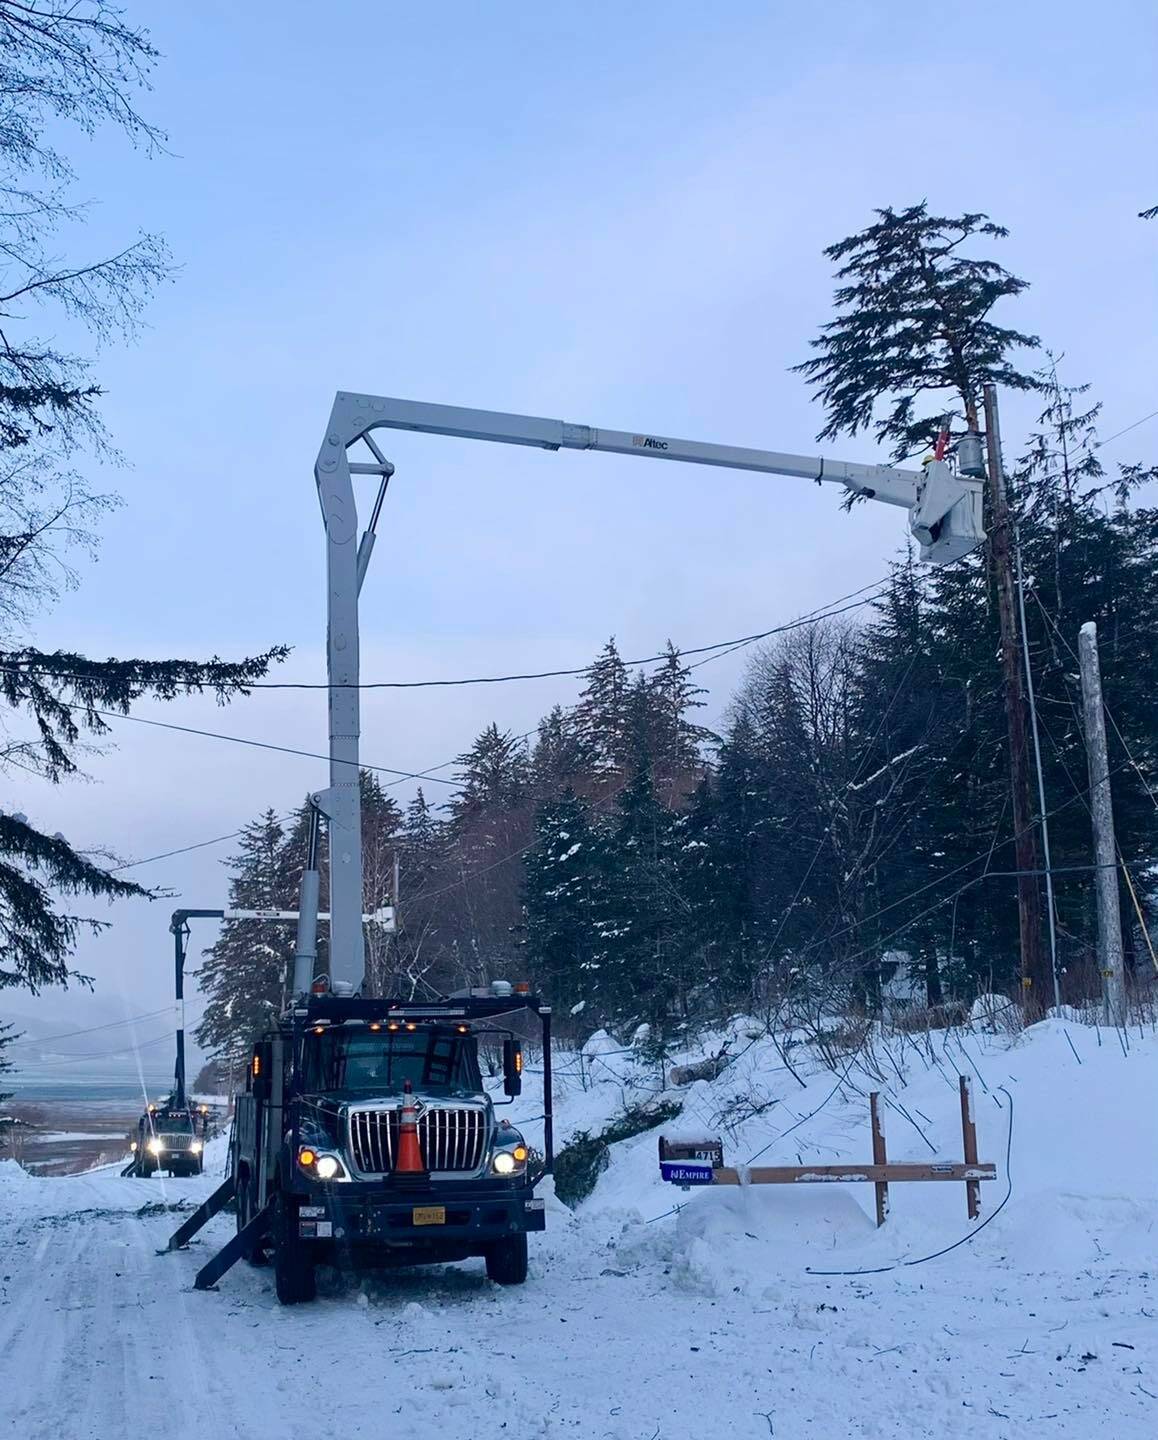 Line crews from Alaska Electric Light & Power work to restore power to Thane following an avalanche on Jan. 3, 2022. (Courtesy photo / Evan Bixby)